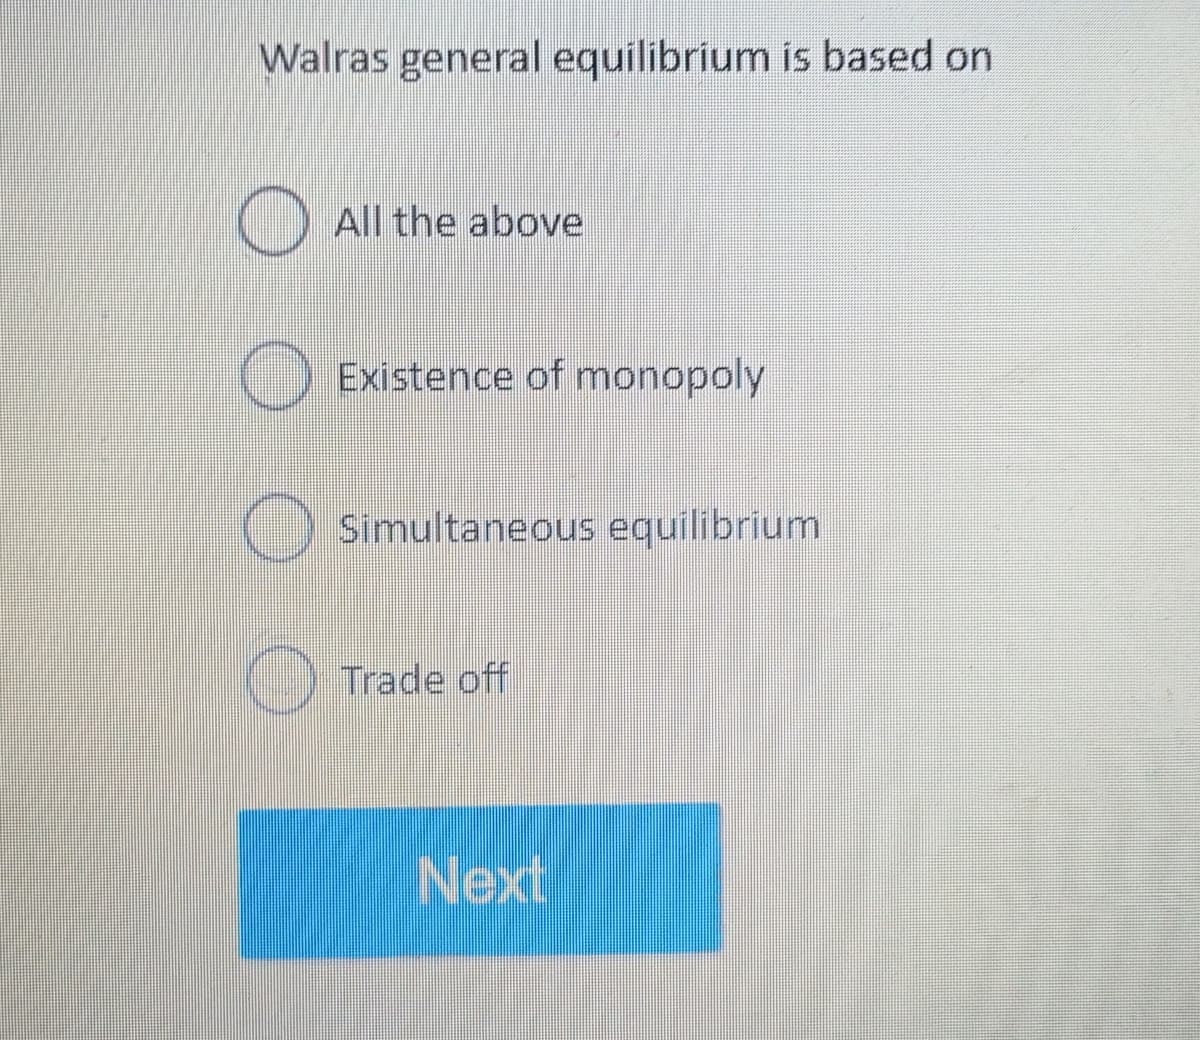 Walras general equilibrium is based on
O
All the above
O
Existence of monopoly
Simultaneous equilibrium
Trade off
O
Next